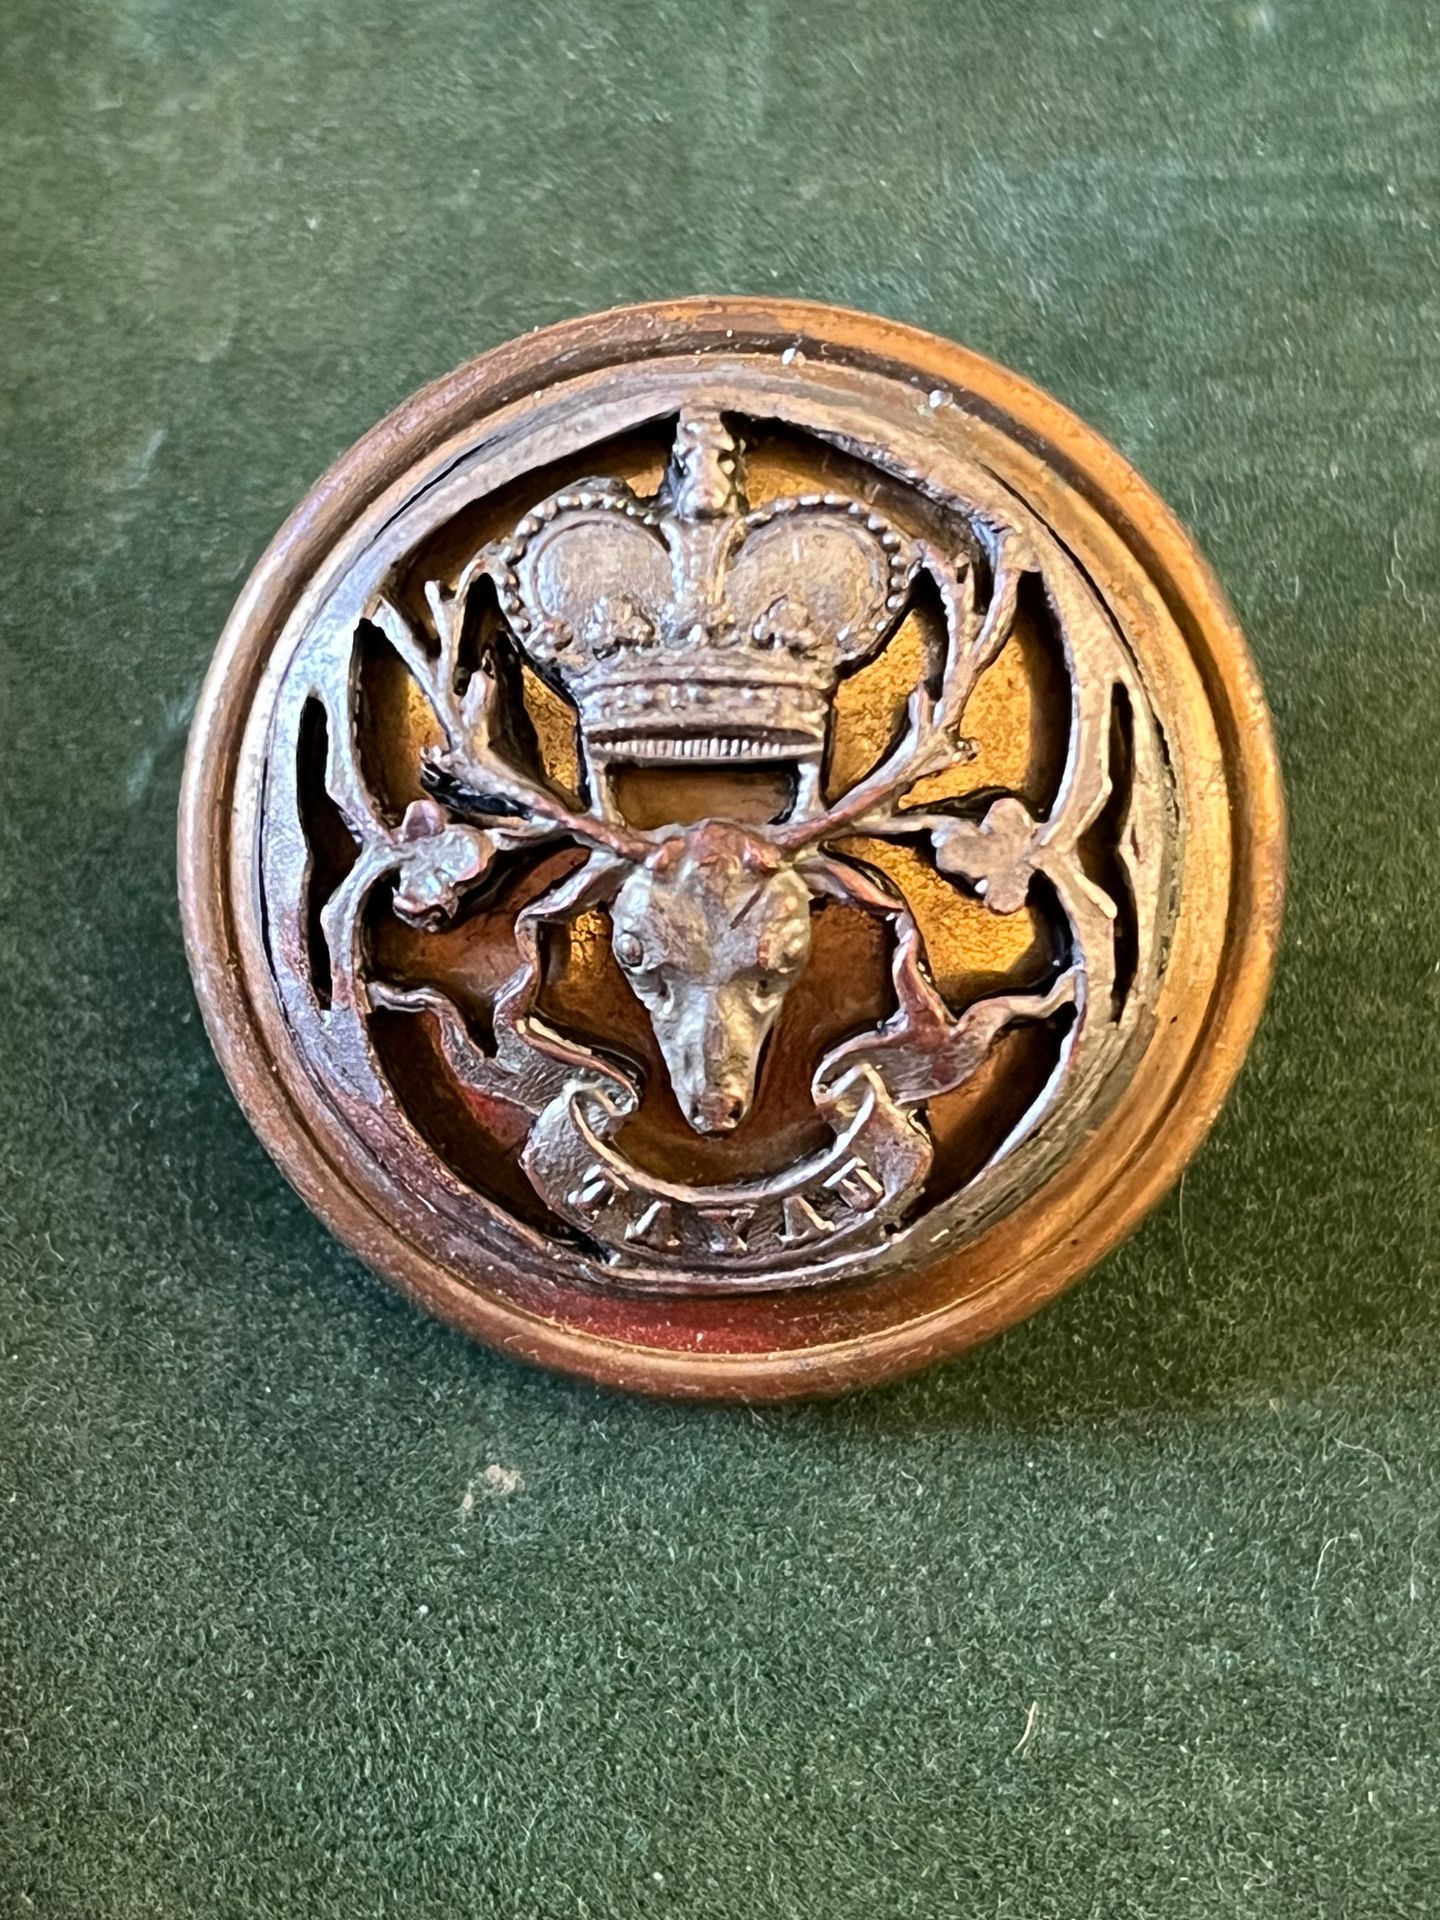 Null Button of the Prince of Wagram's crew (1806-1870)